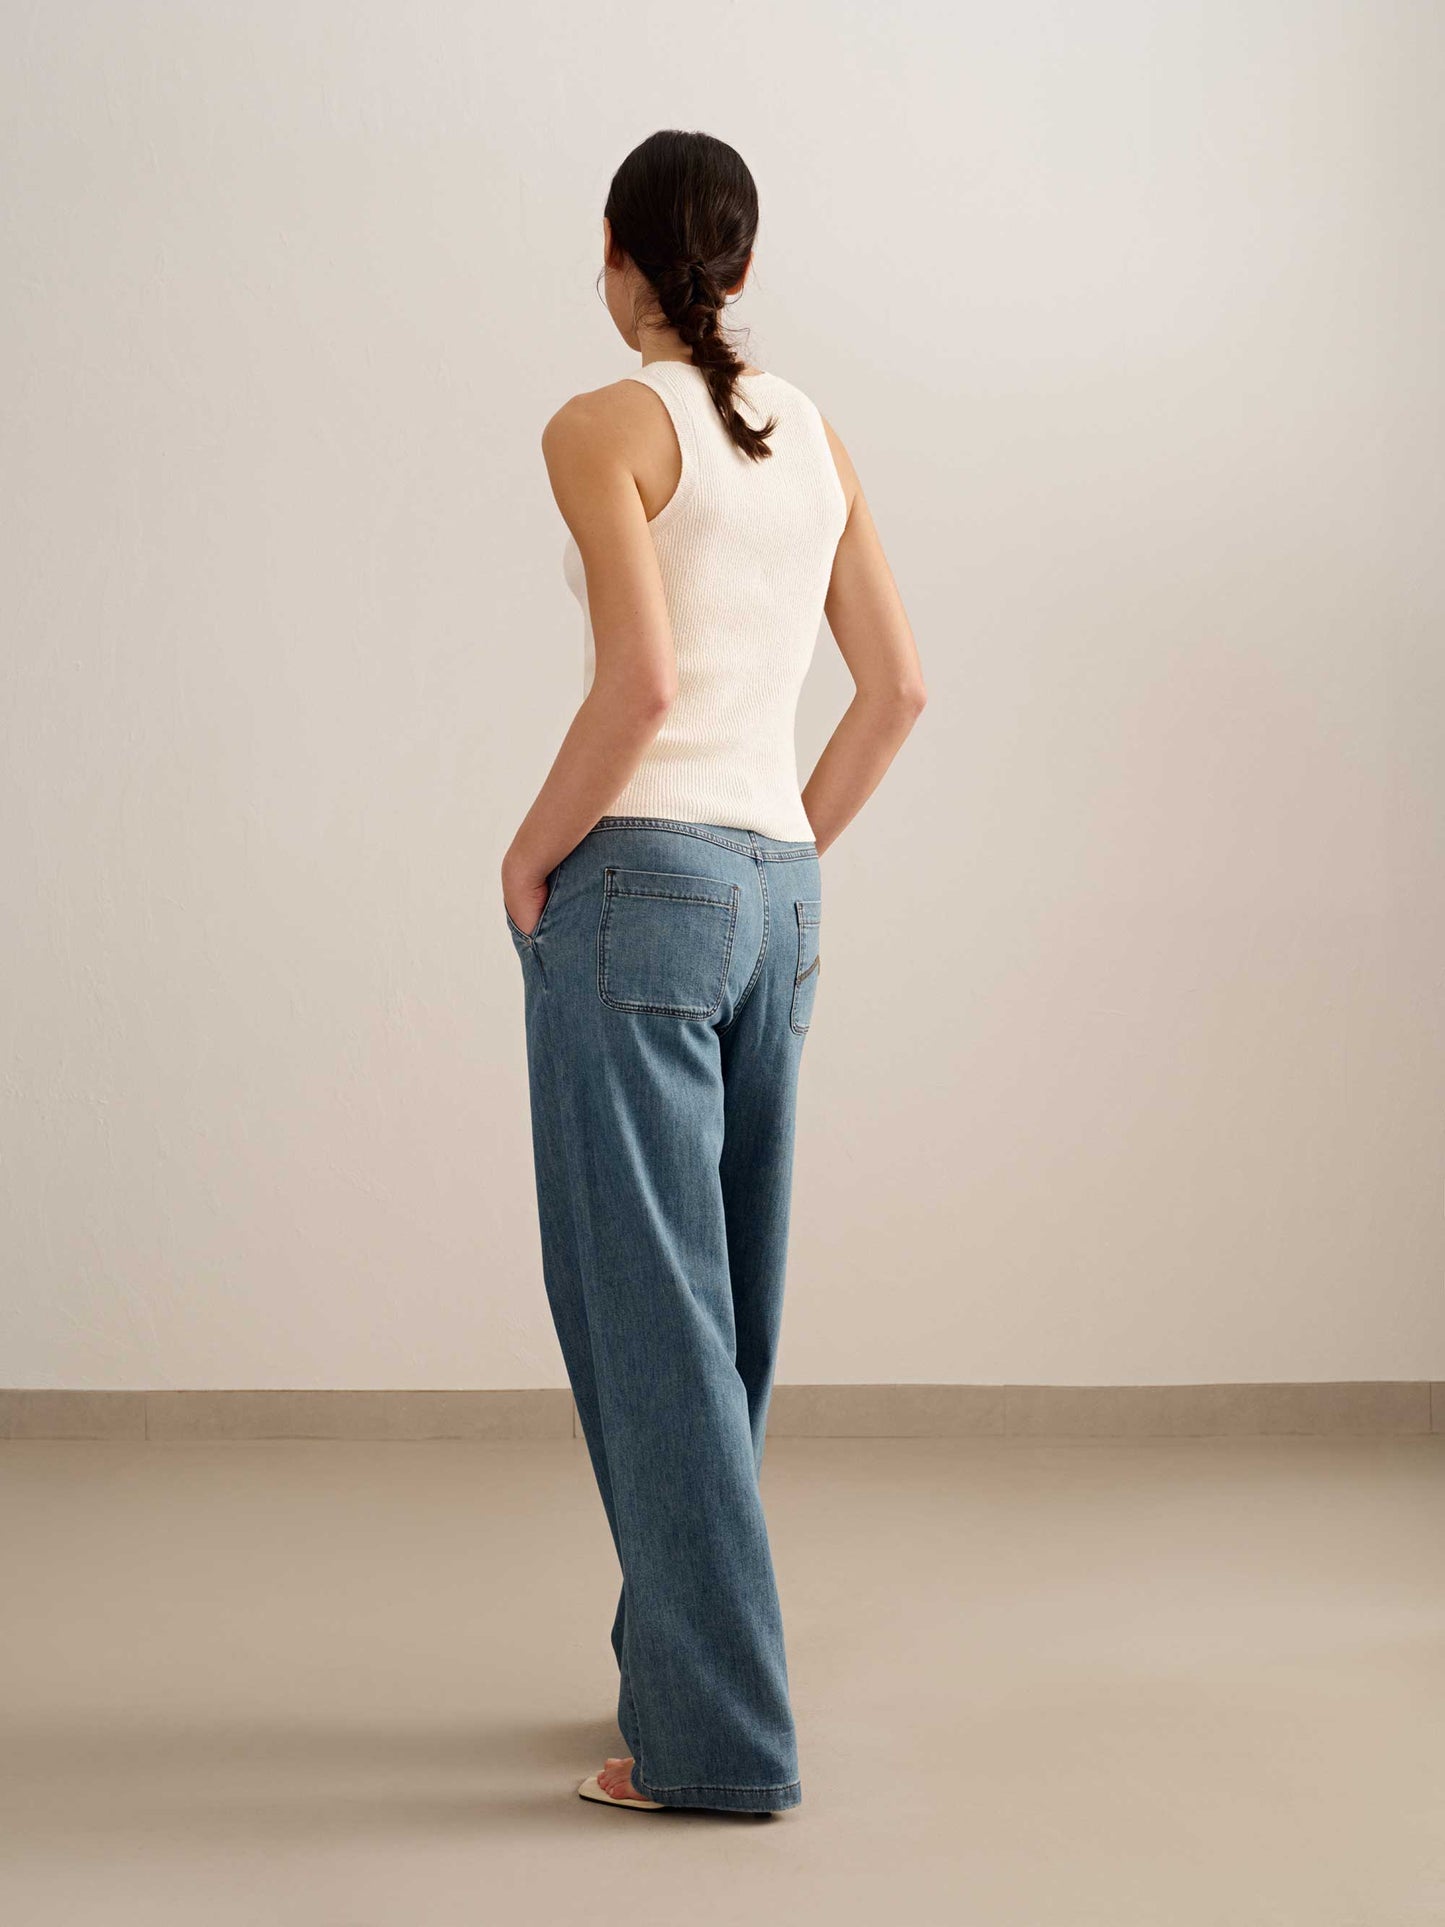 back of a woman wearing a blue tank and blue jeans